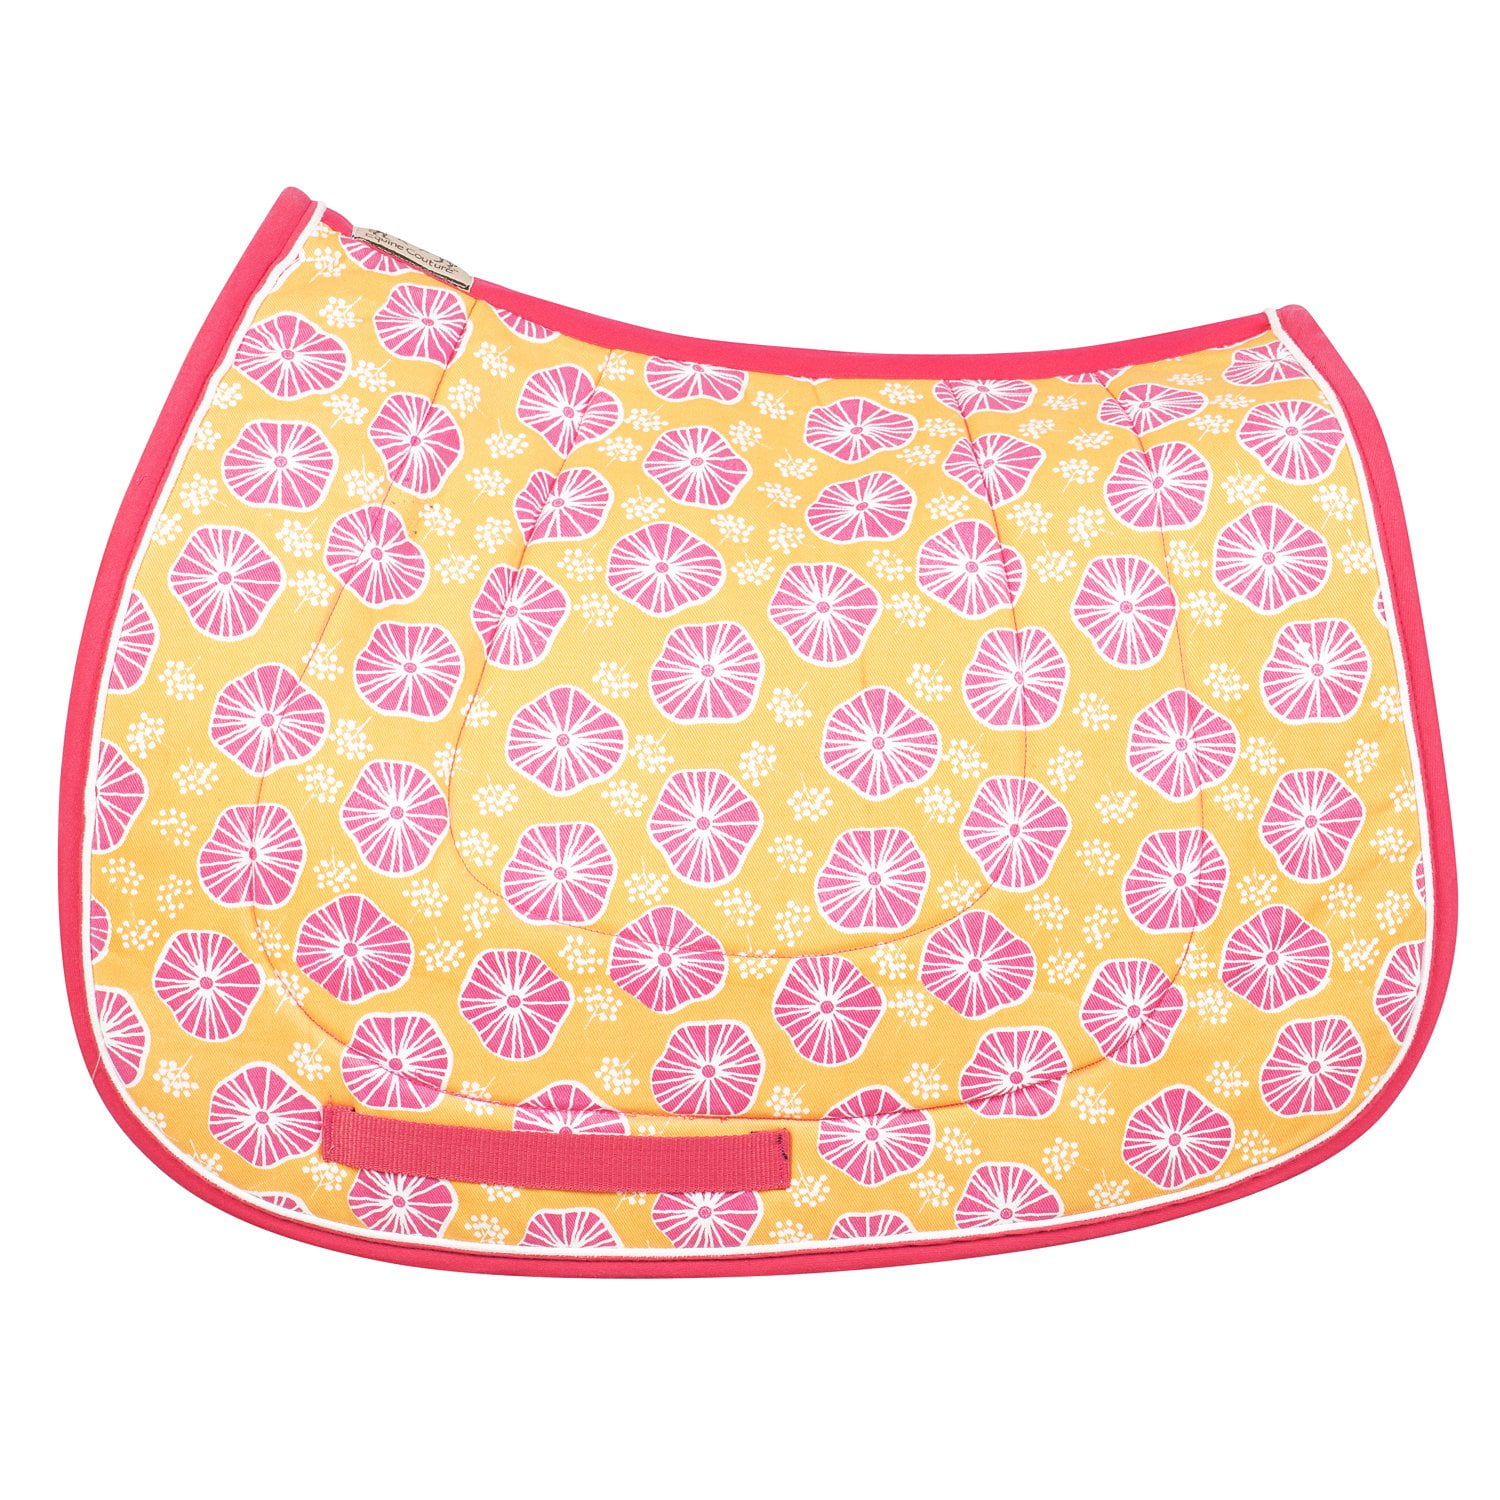 Equine Couture Whales Pony Saddle Pad Pink